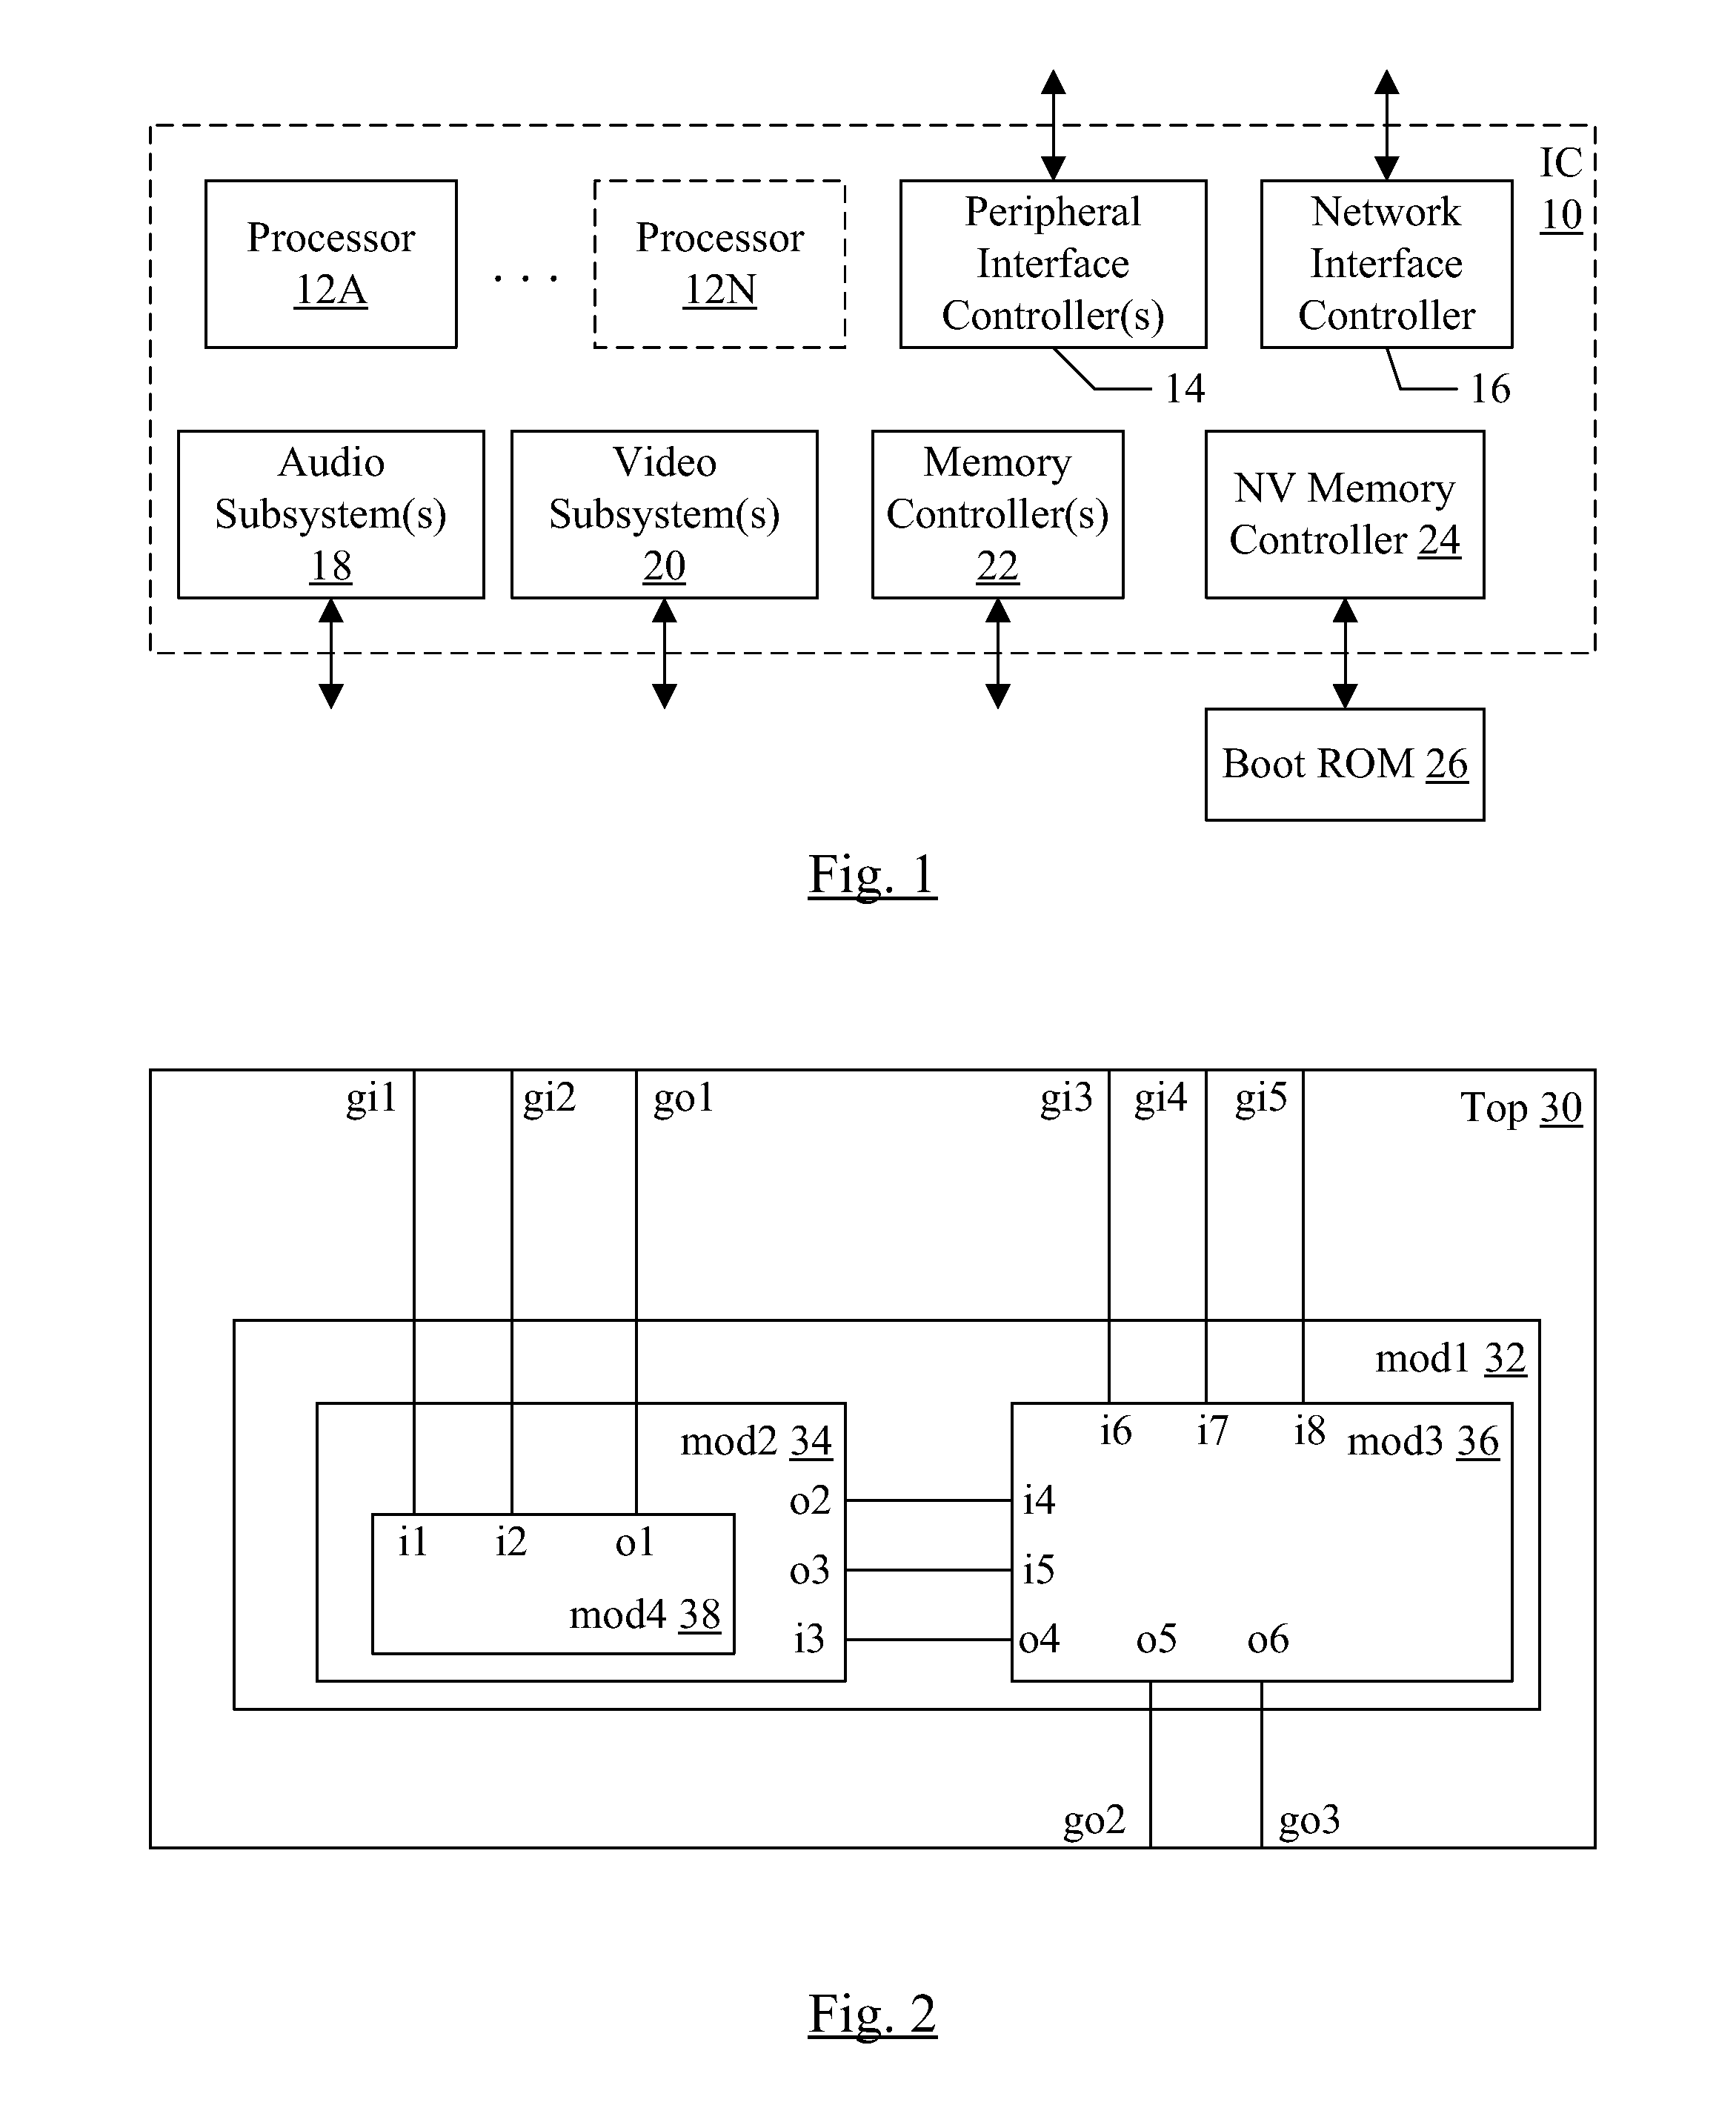 Engineering Change Order Language for Modifying Integrated Circuit Design Files for Programmable Logic Device Implementation